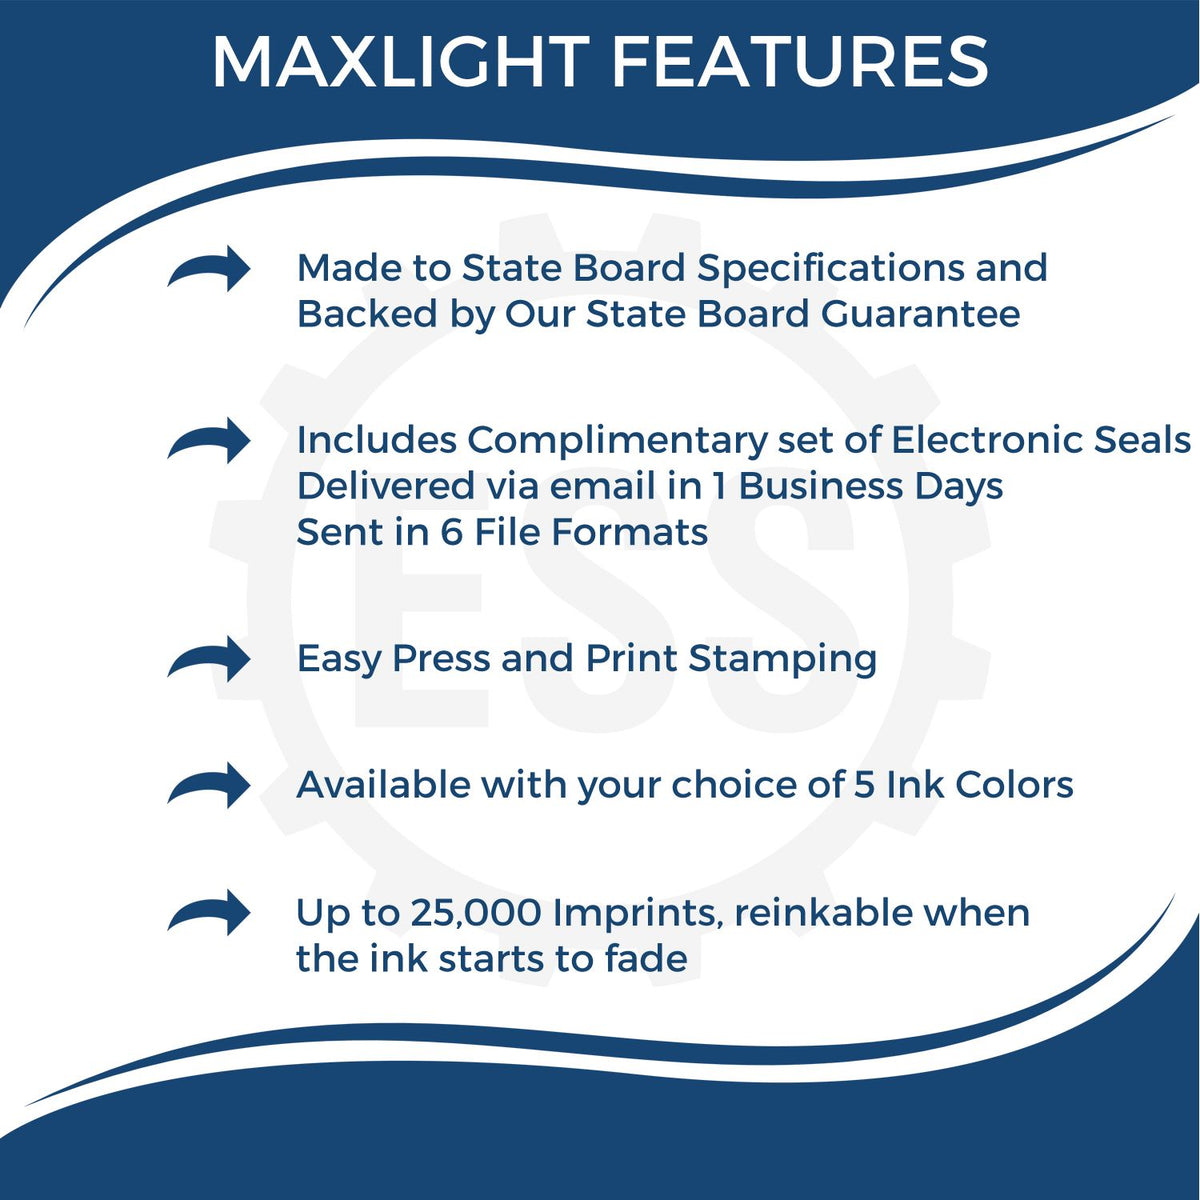 A picture of an infographic highlighting the selling points for the MaxLight Premium Pre-Inked Maryland Rectangular Notarial Stamp